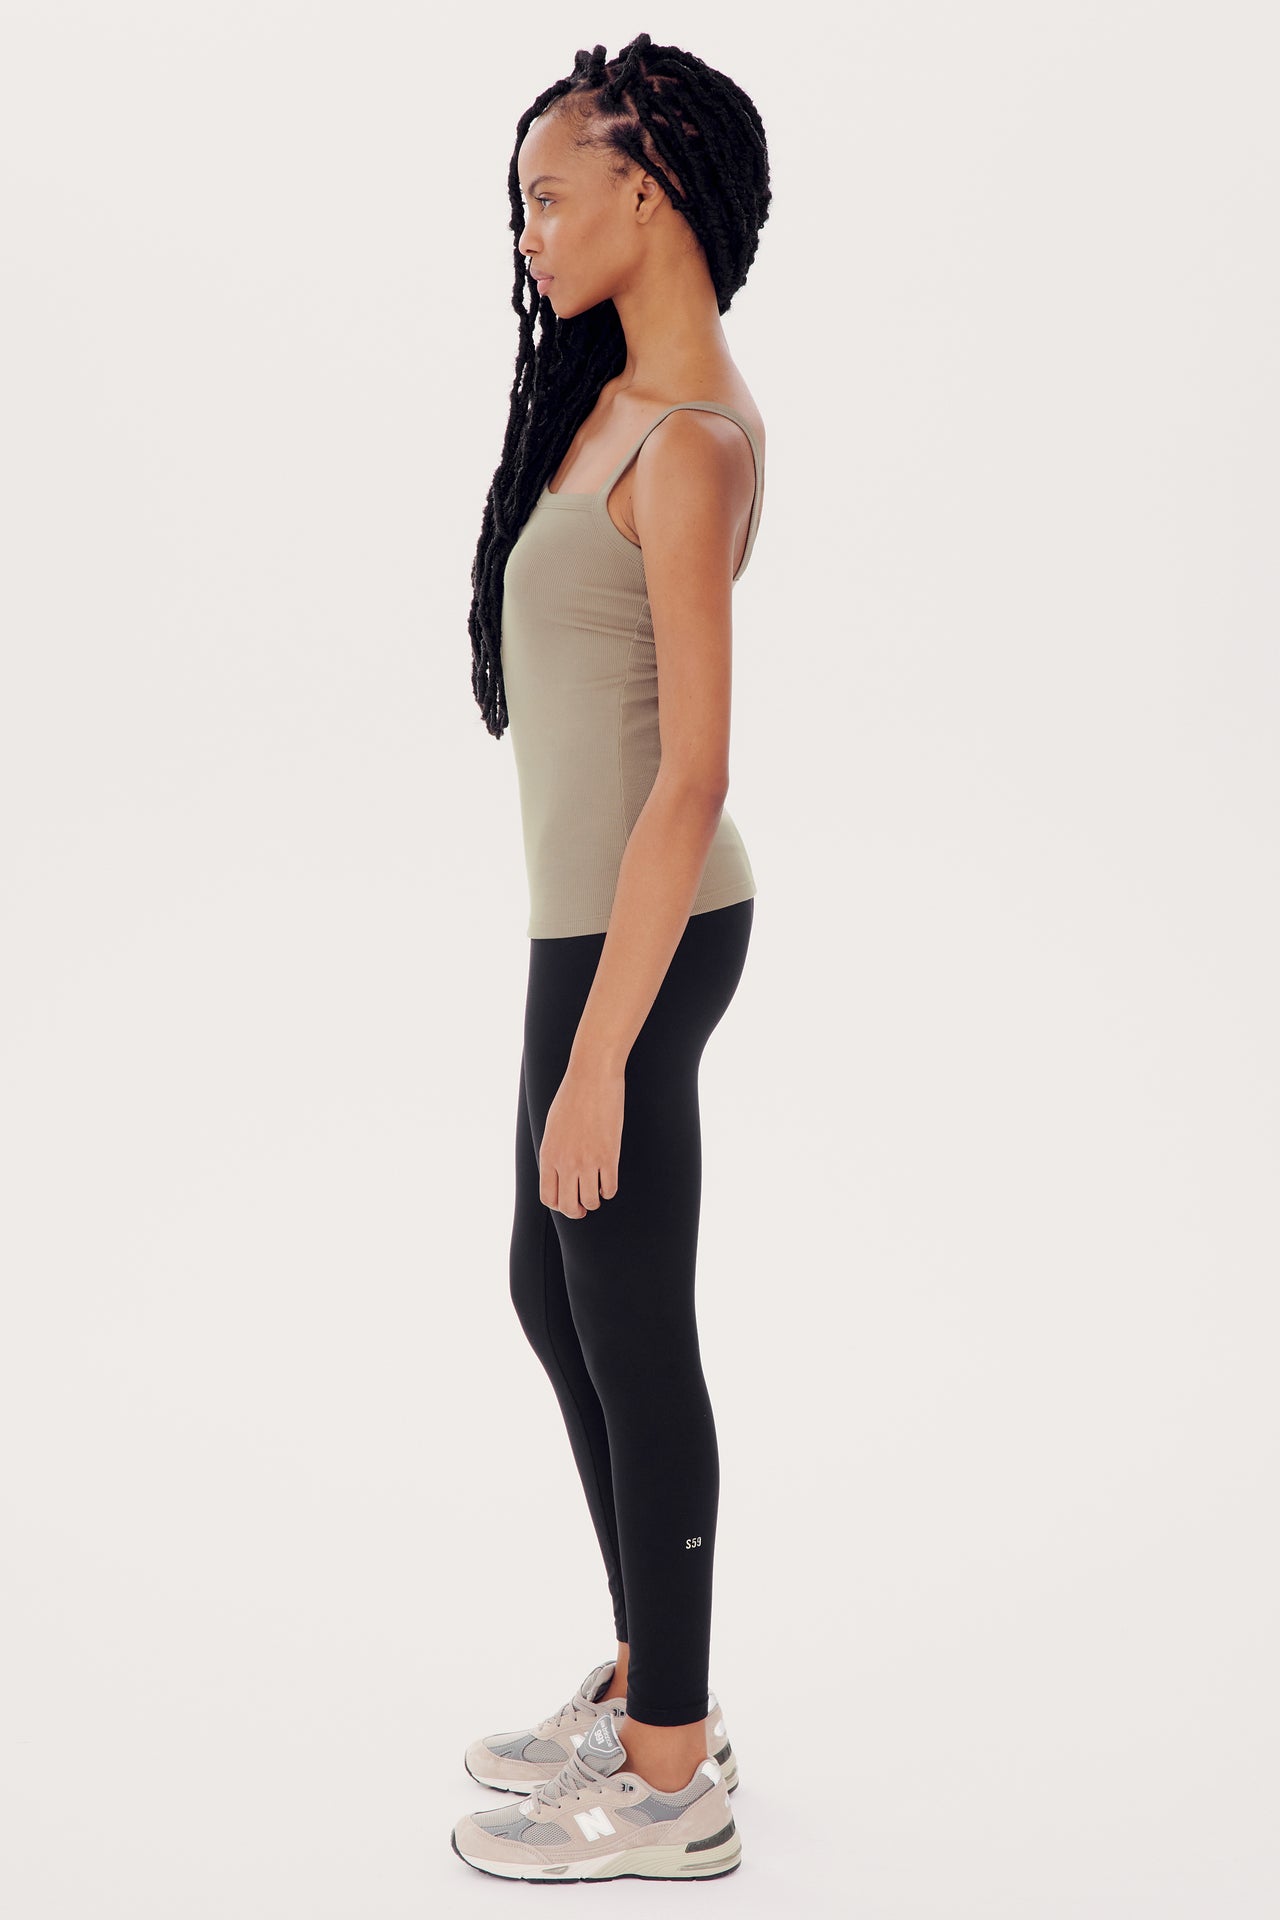 A woman in a Romy Rib Tank in Latte by SPLITS59 with a square neckline and black leggings standing sideways, with her hands slightly touching her thighs, against a white background.